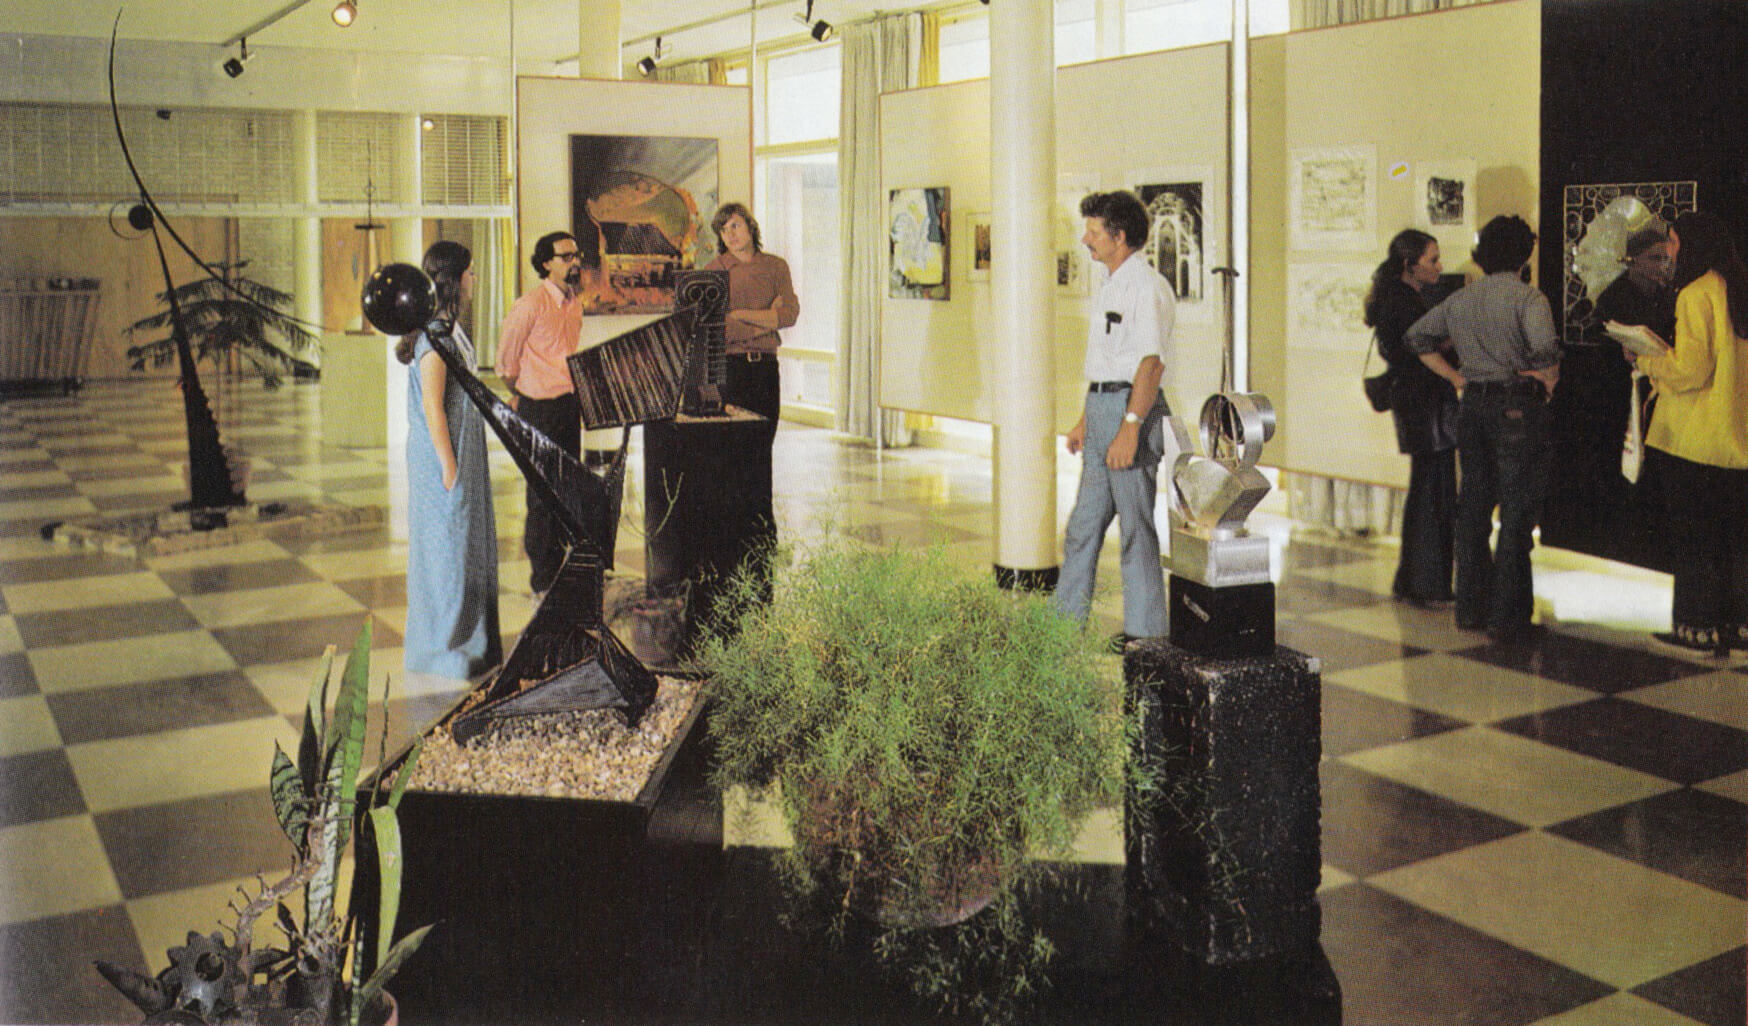 archival photo of a gallery space in the 1970s